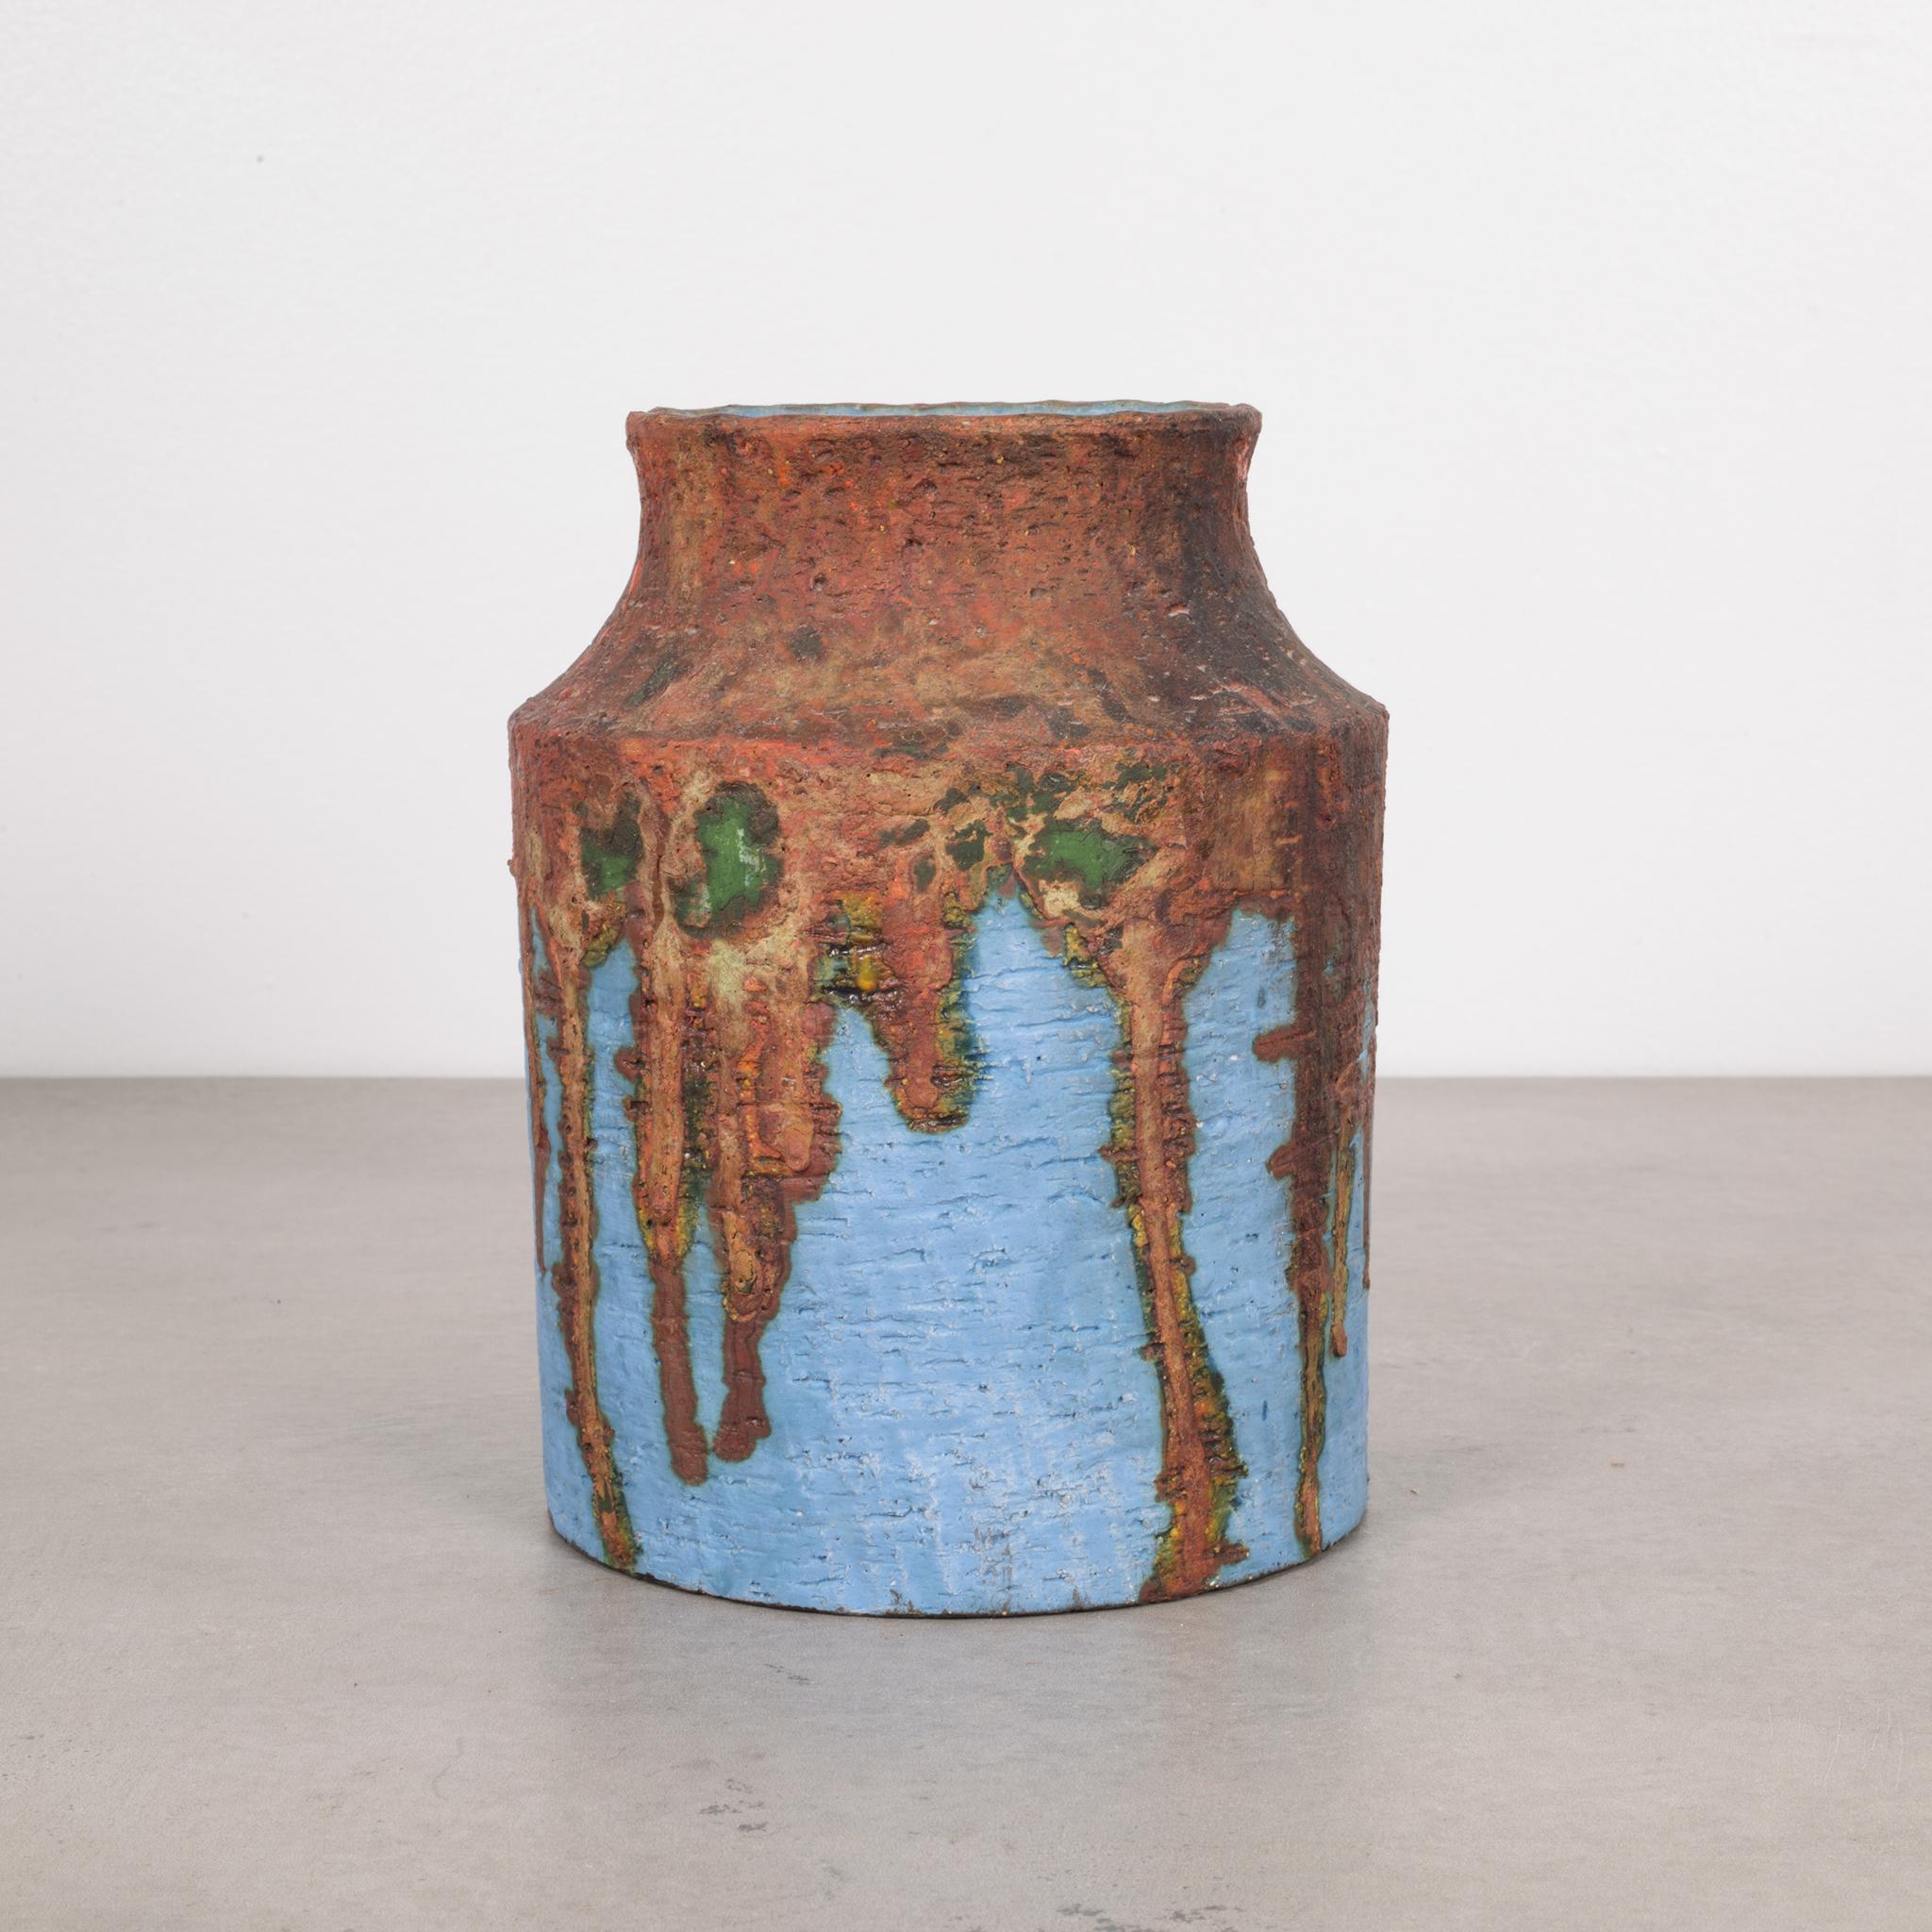 About

This is an original signed Marcello Fantoni glazed ceramic vase. This piece is numbered and signed by the artist. Hand-made earthenware with rough, matte burnt orange, blue and green glaze. This piece has retained its original